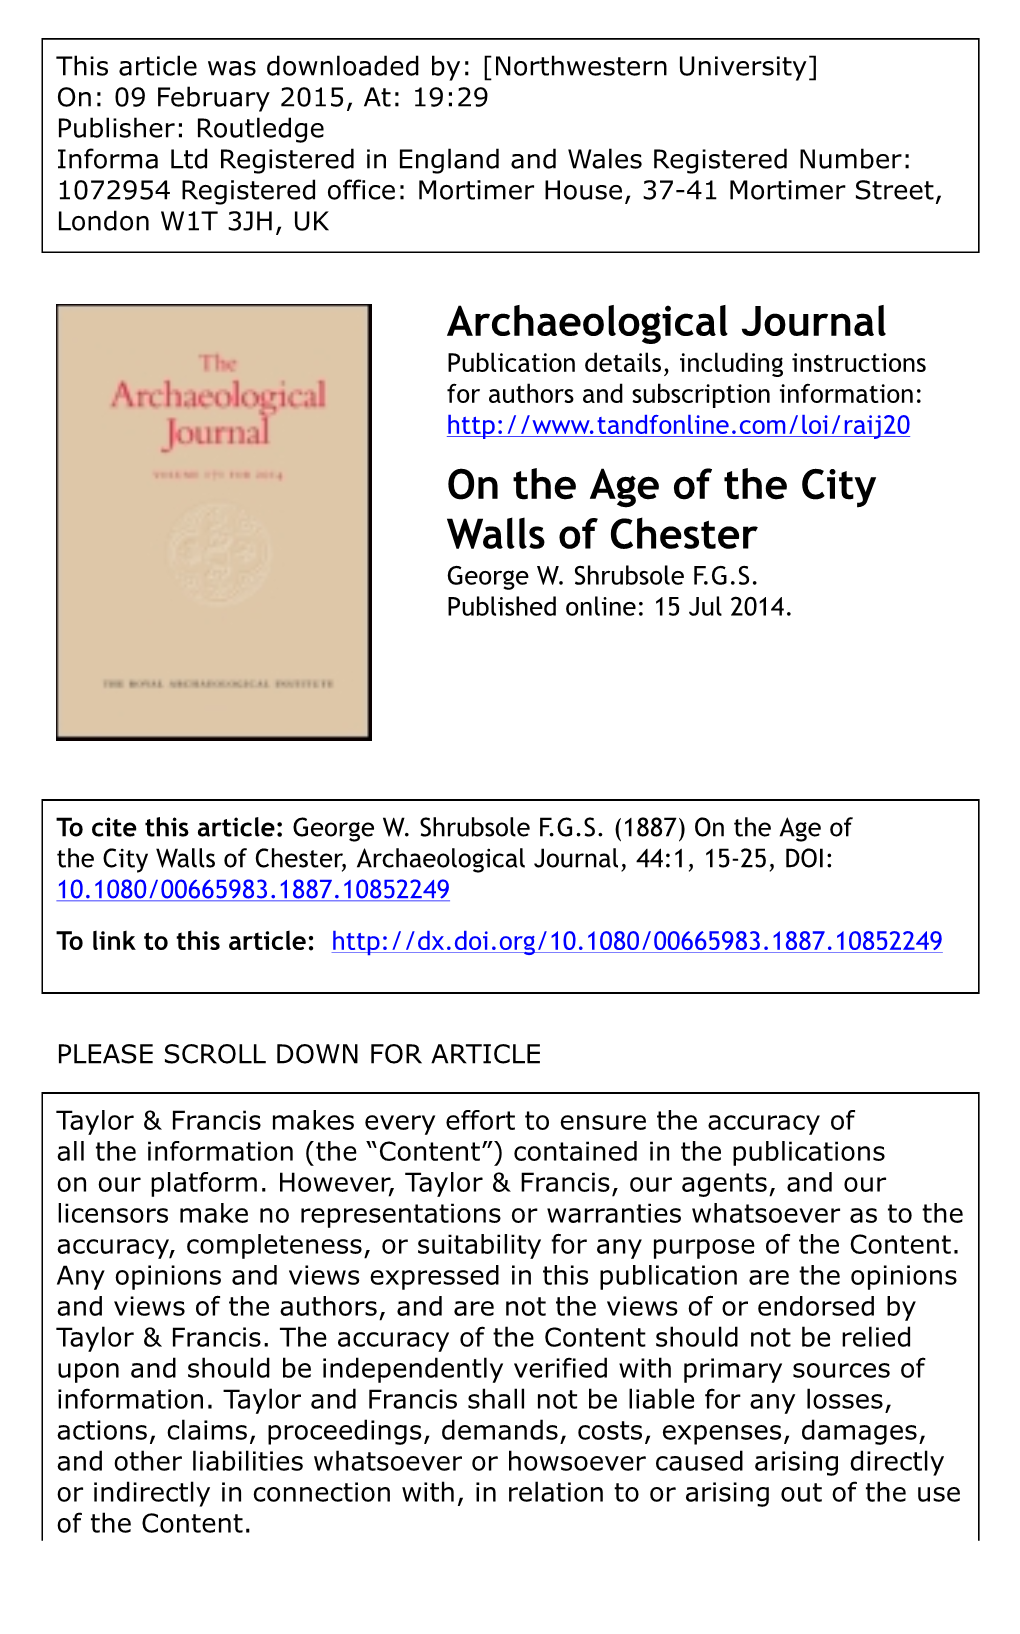 Archaeological Journal on the Age of the City Walls Of